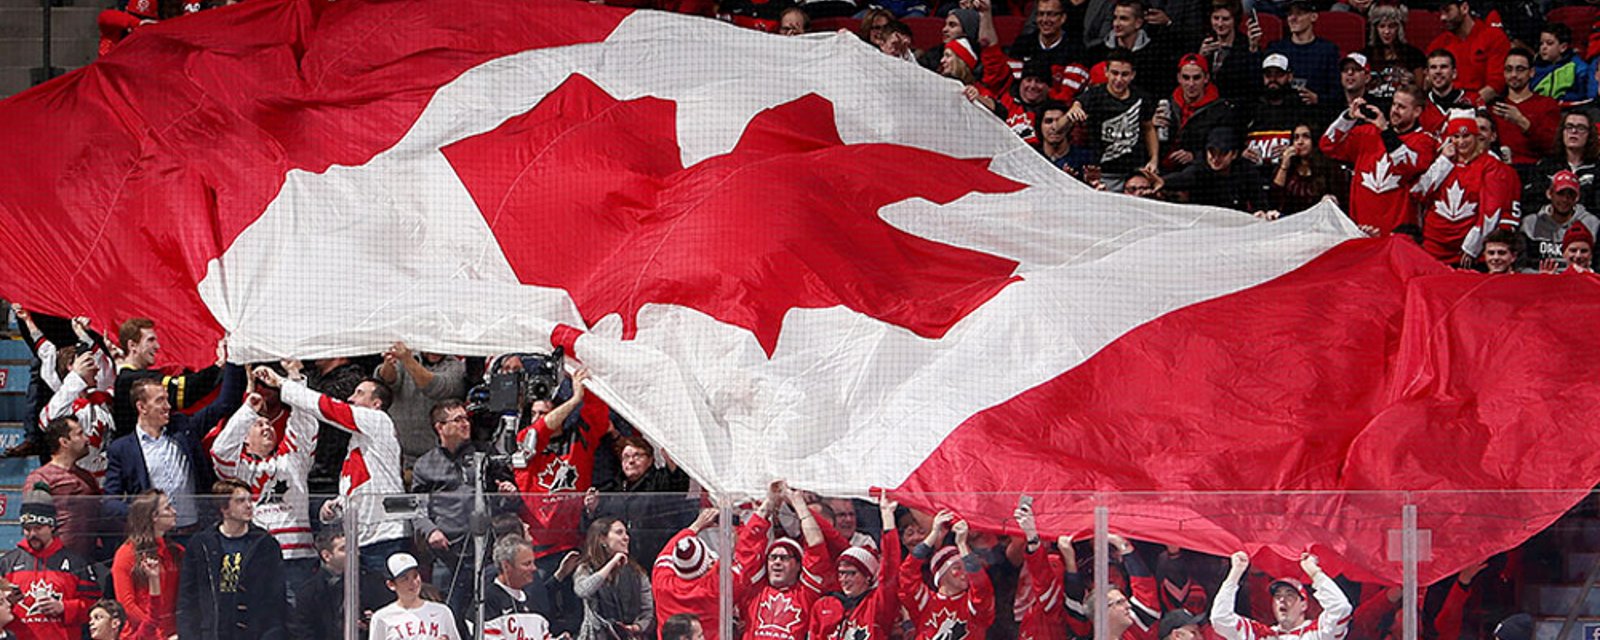 Canadian premier confirms that NHL has reached out to schedule games in province